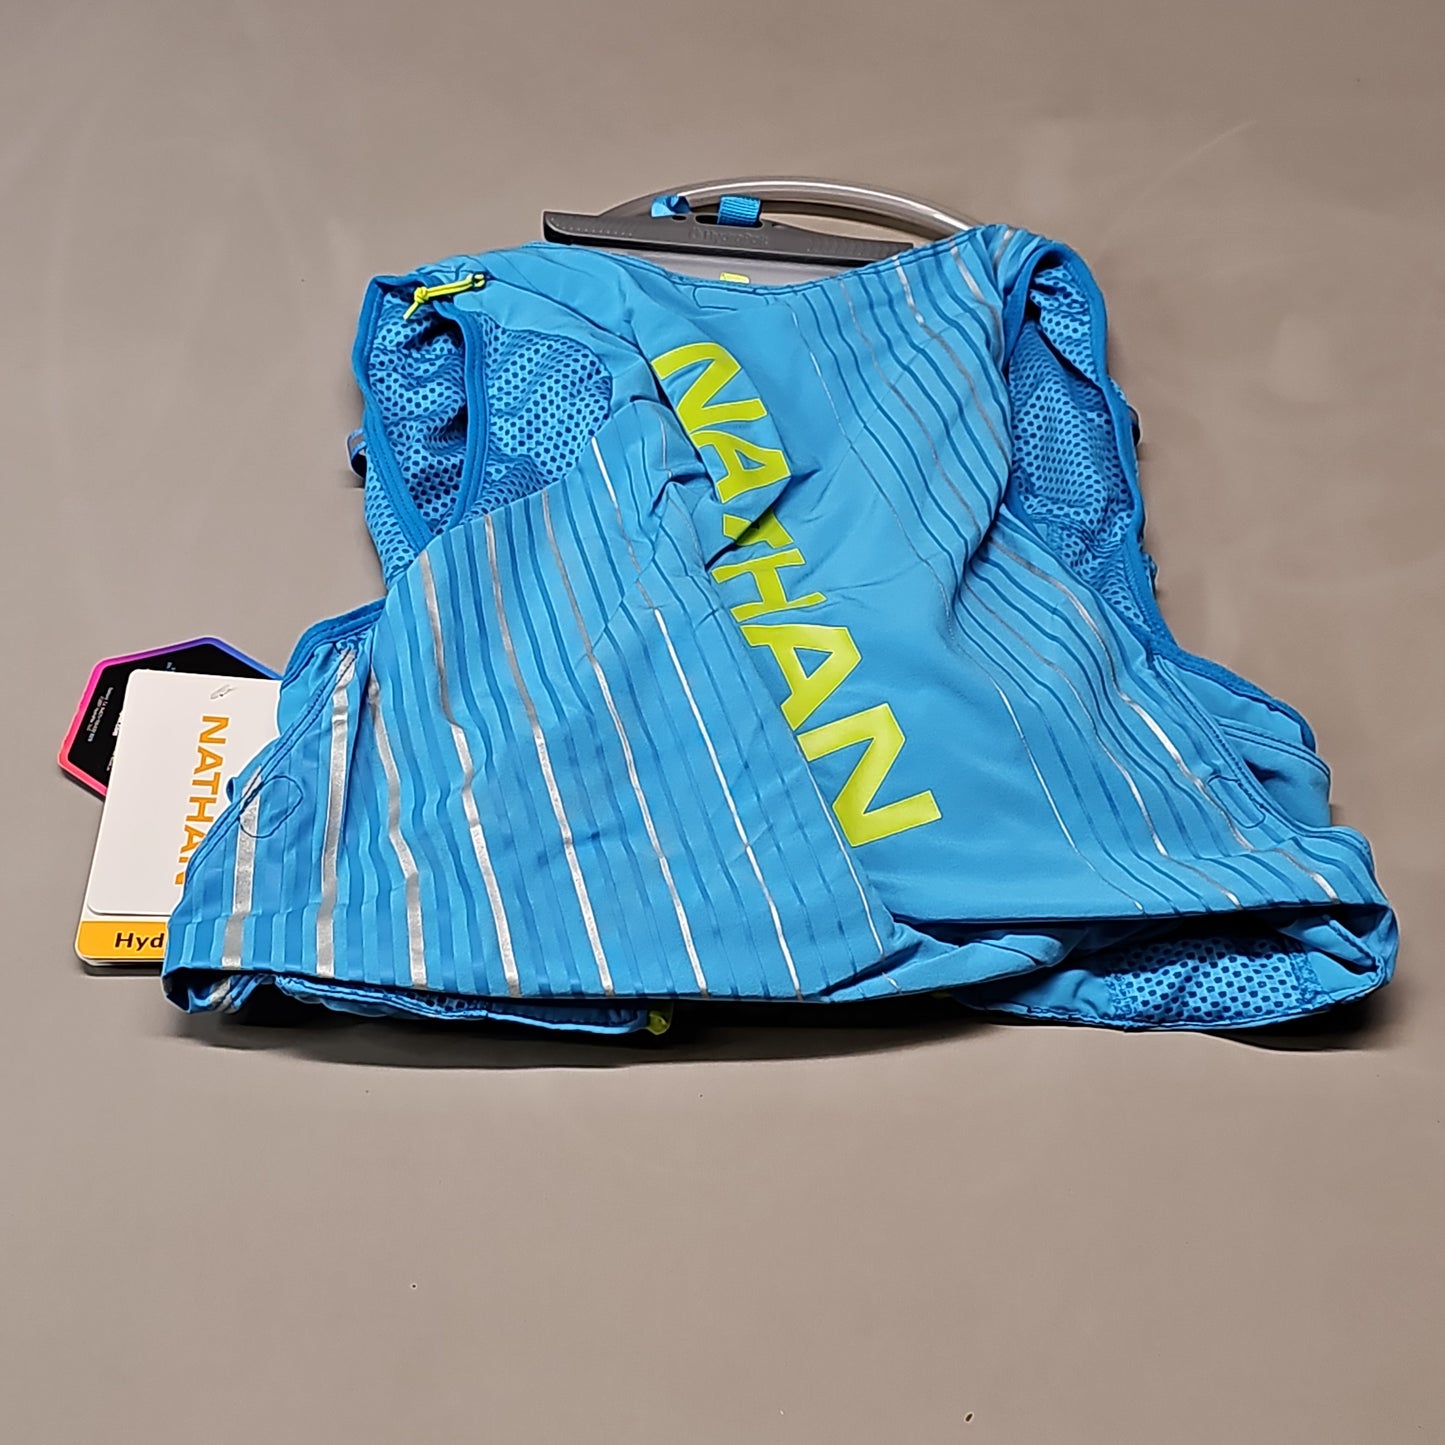 NATHAN Pinnacle 12 Liter Hydration Race Vest Unisex Sz S Blue Me Away/Finish Lime (New)